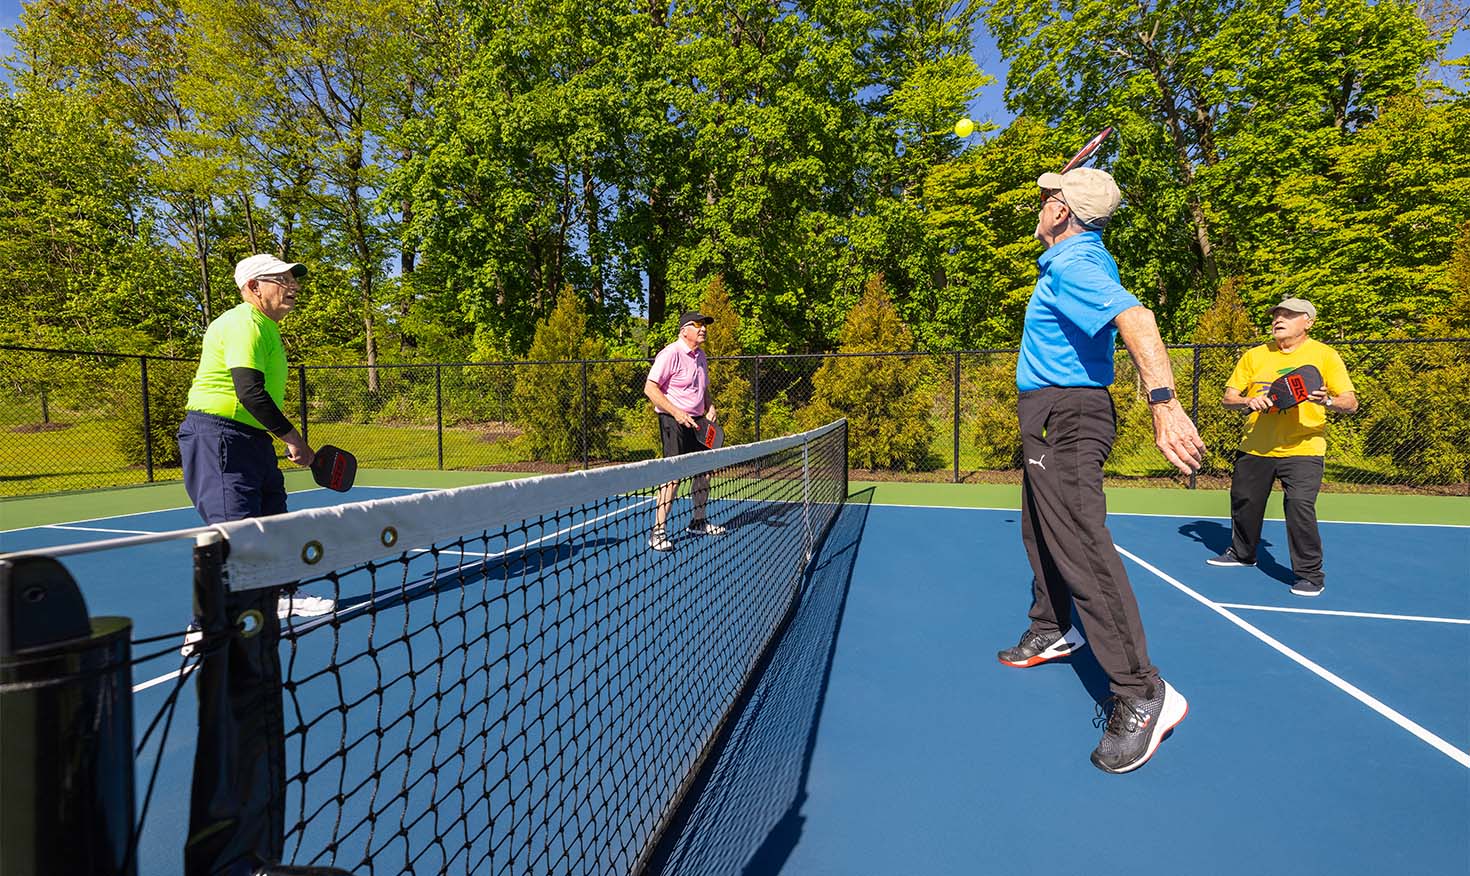 Four senior men playing pickleball on an outdoor court